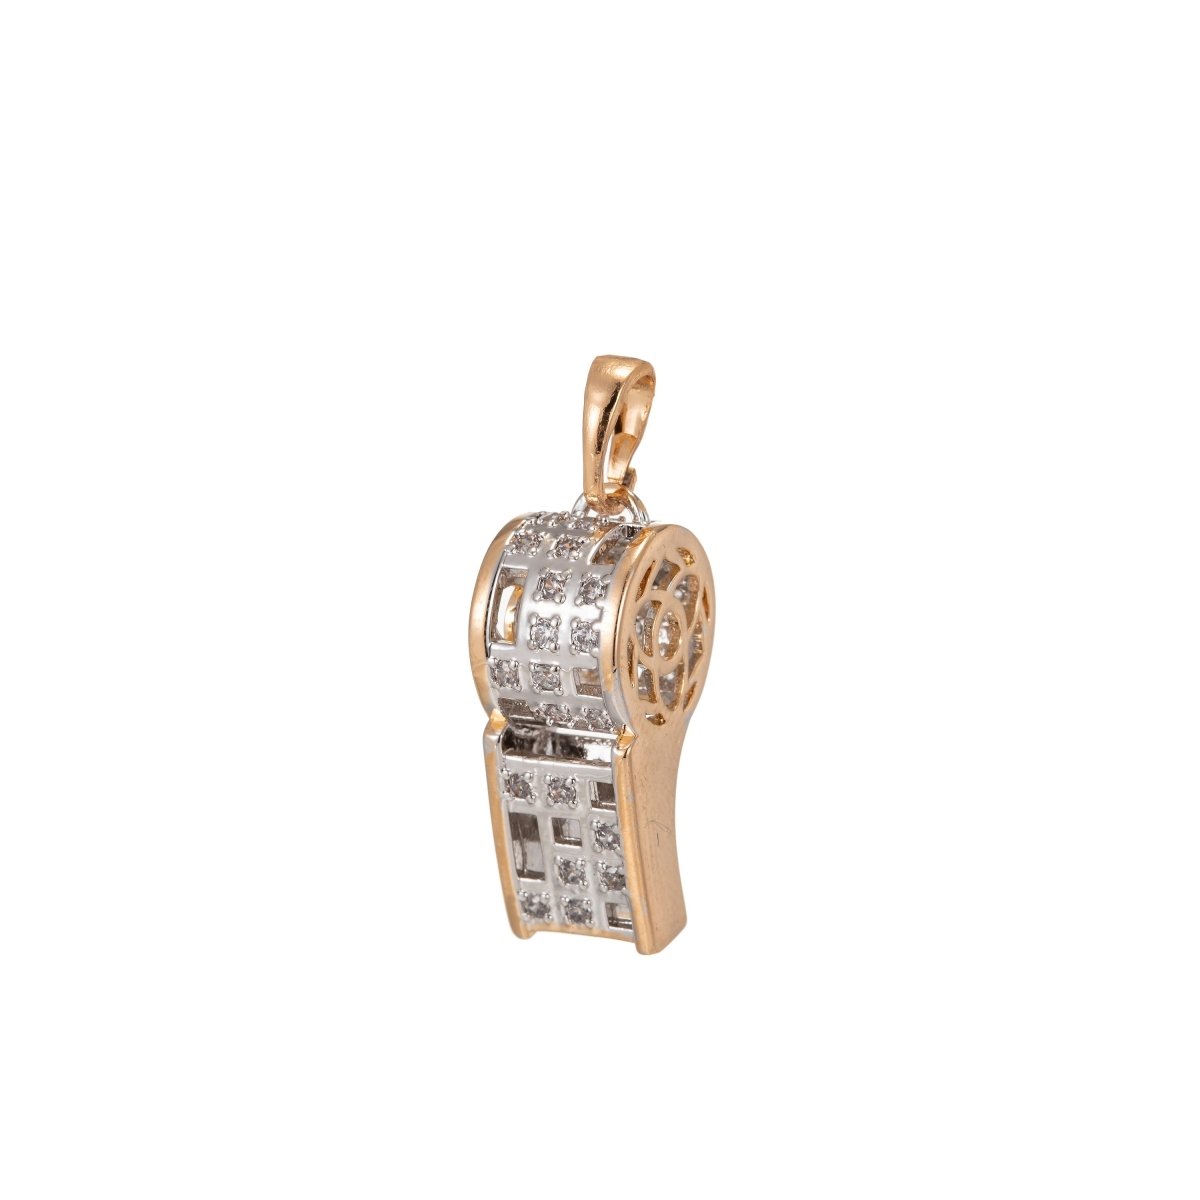 18K Gold Filled Whistle Charm Micro Pave Pendant Findings for Necklace Component Jewelry Making Supplies I-213 - DLUXCA